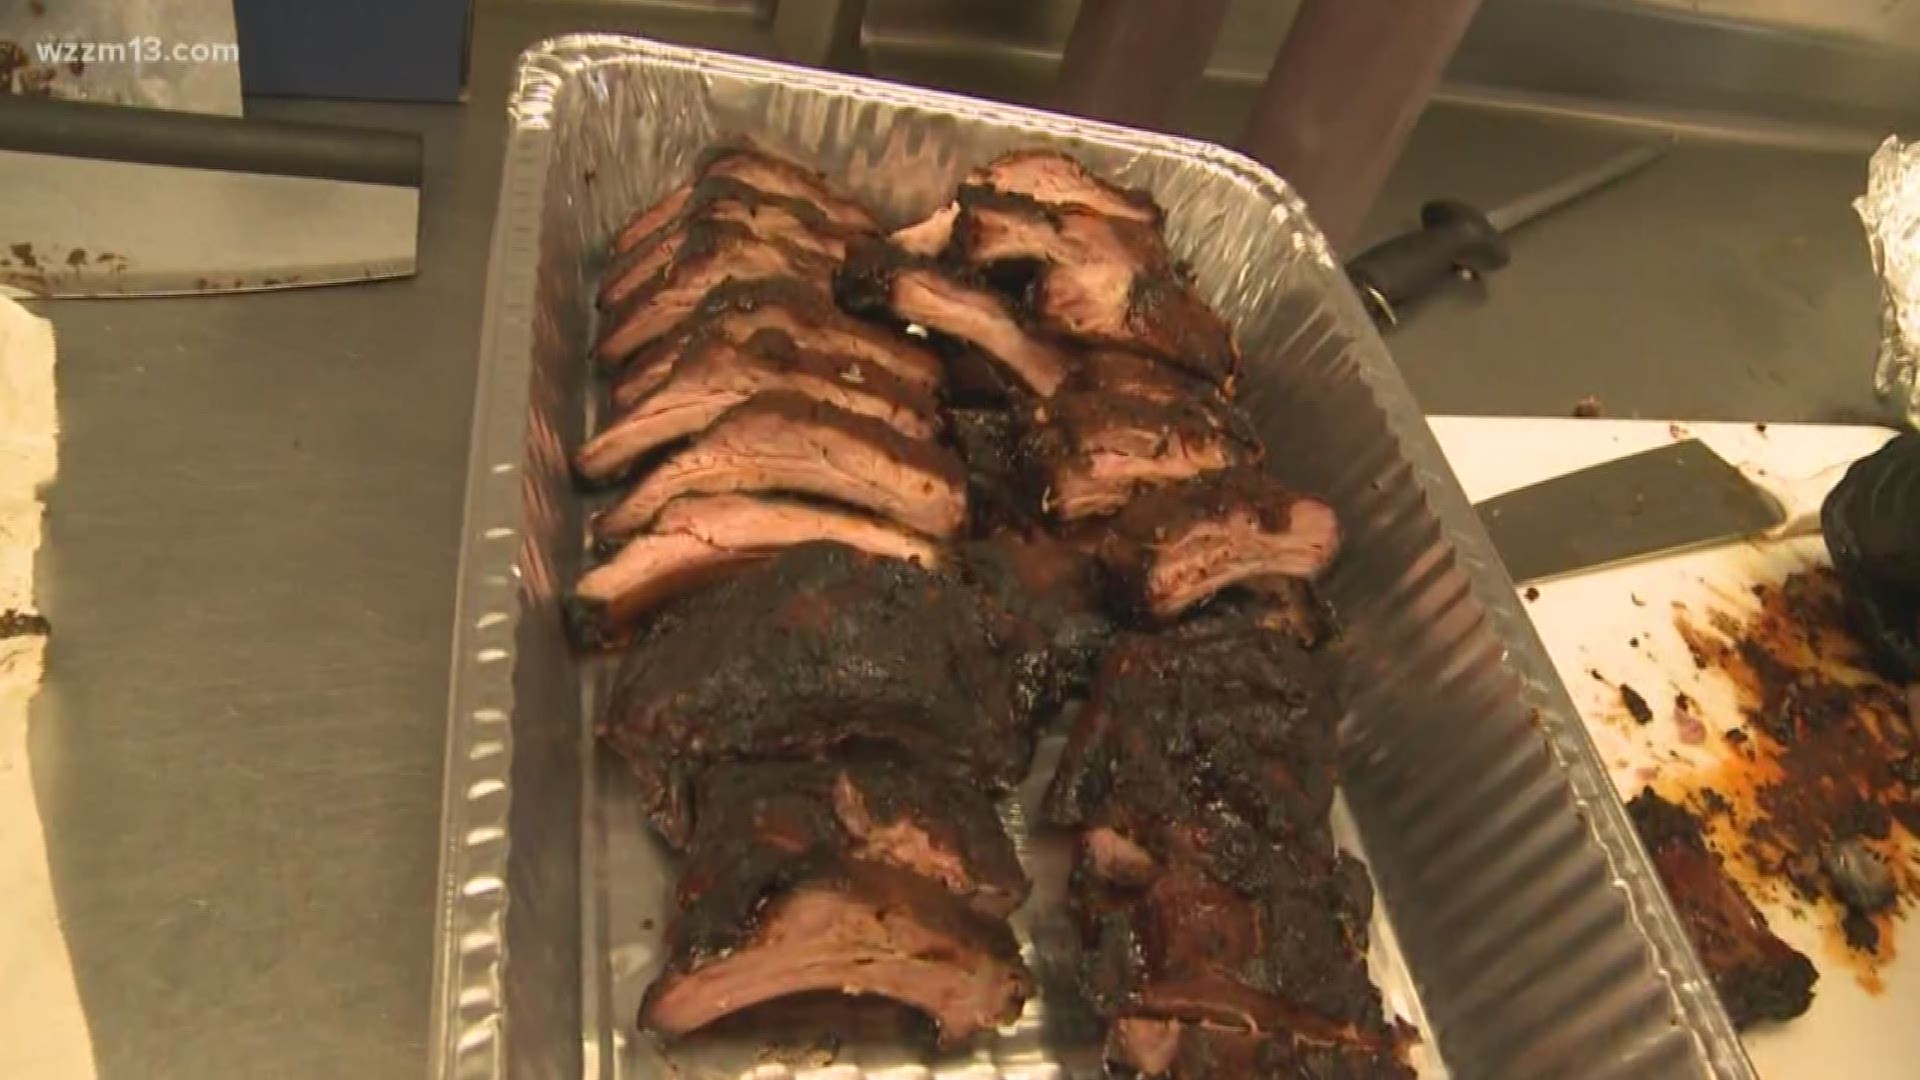 West Michigan is not known to be a barbecue hot spot but there's a spot in the Cascade area that's smoking the competition.